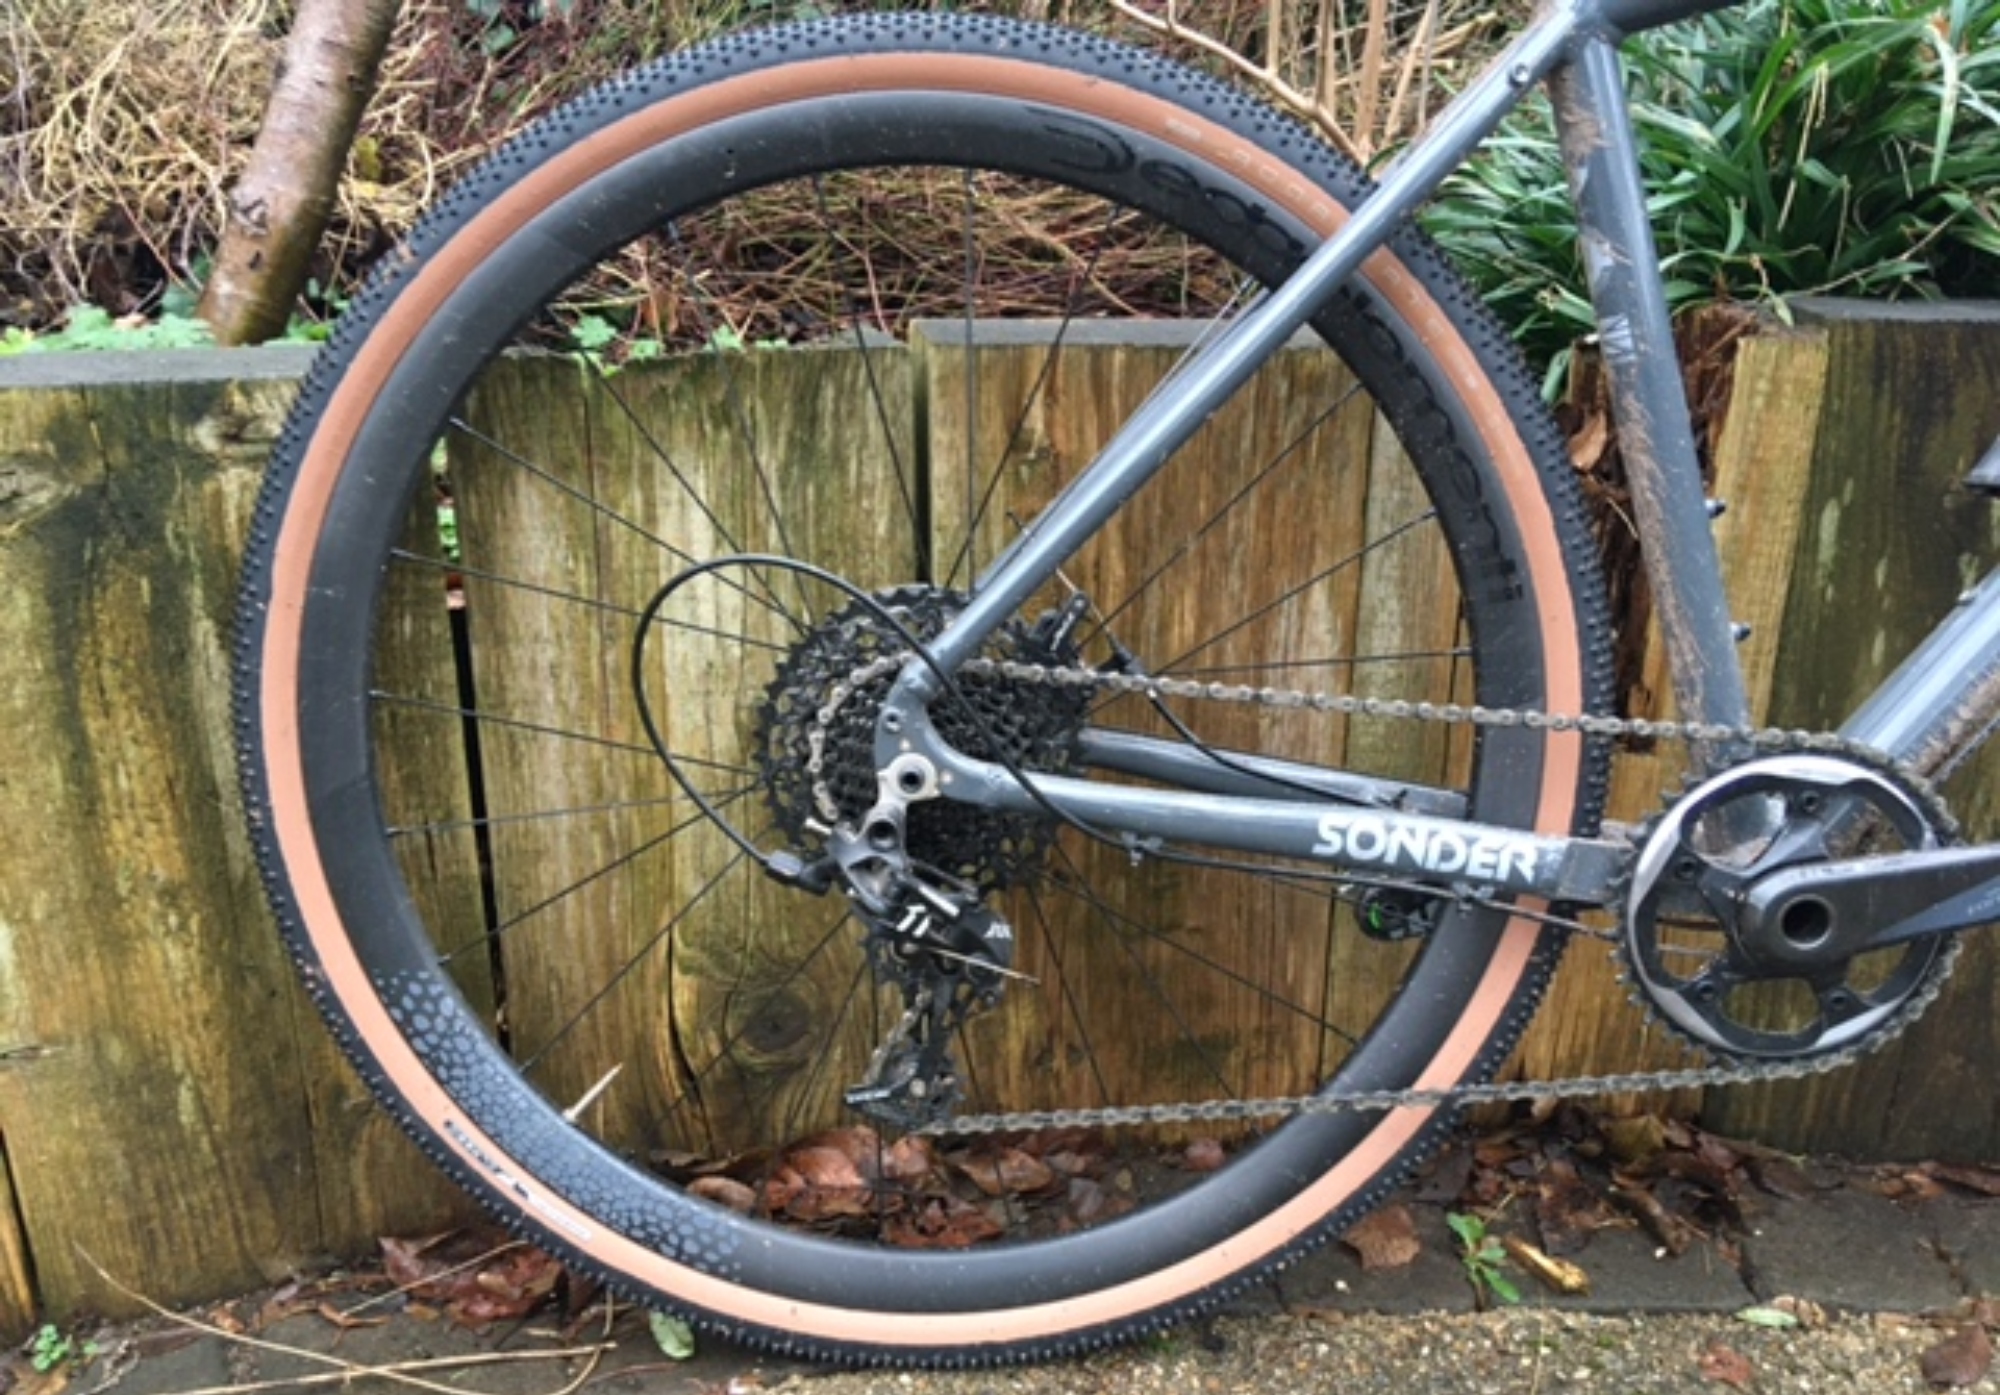 Image shows rear wheel shod with American Classics Aggregate gravel tire